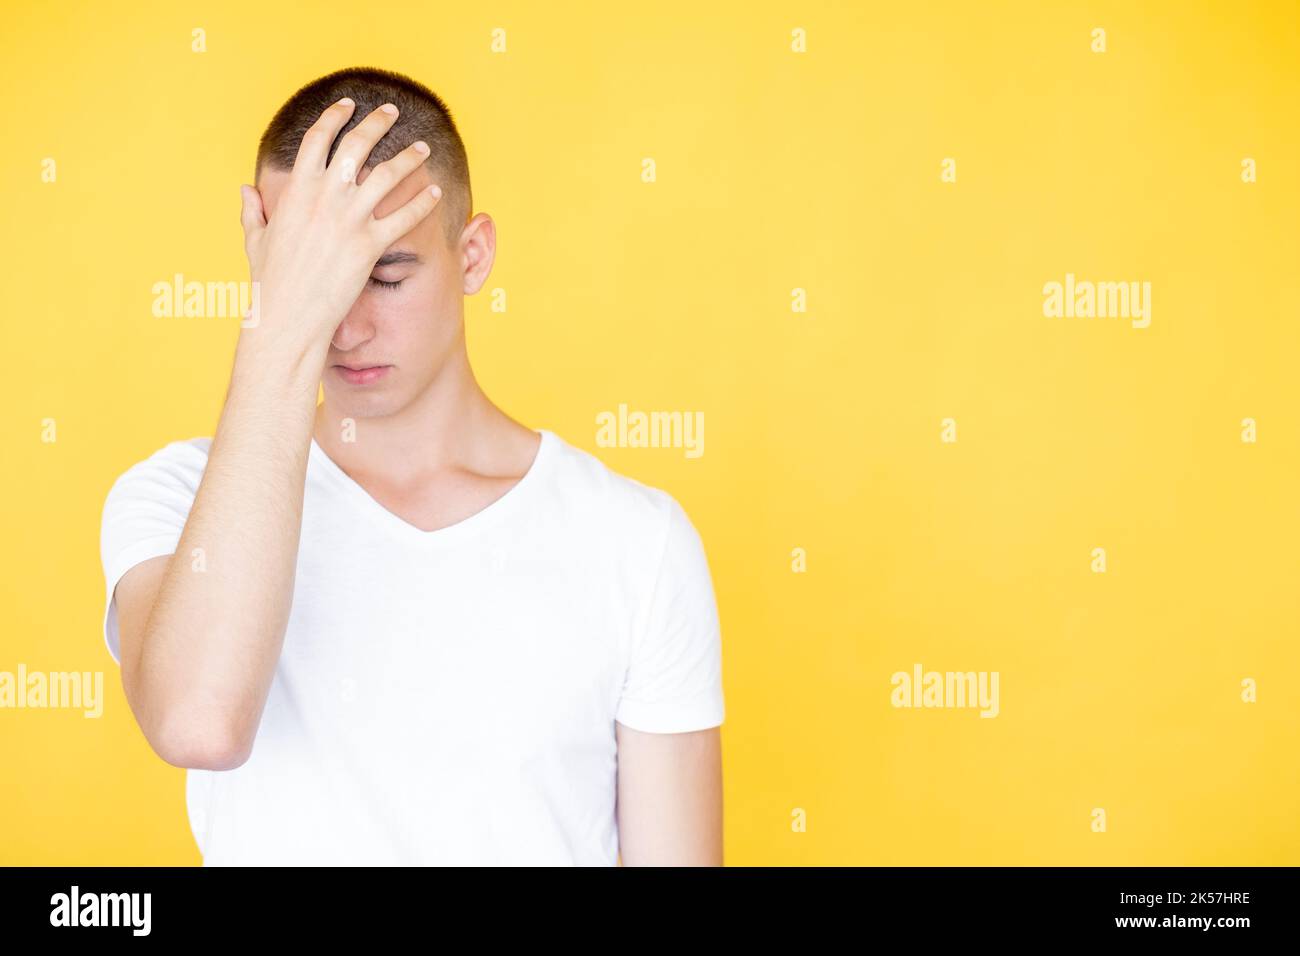 facepalm gesture shocked man epic fail embarrassed Stock Photo